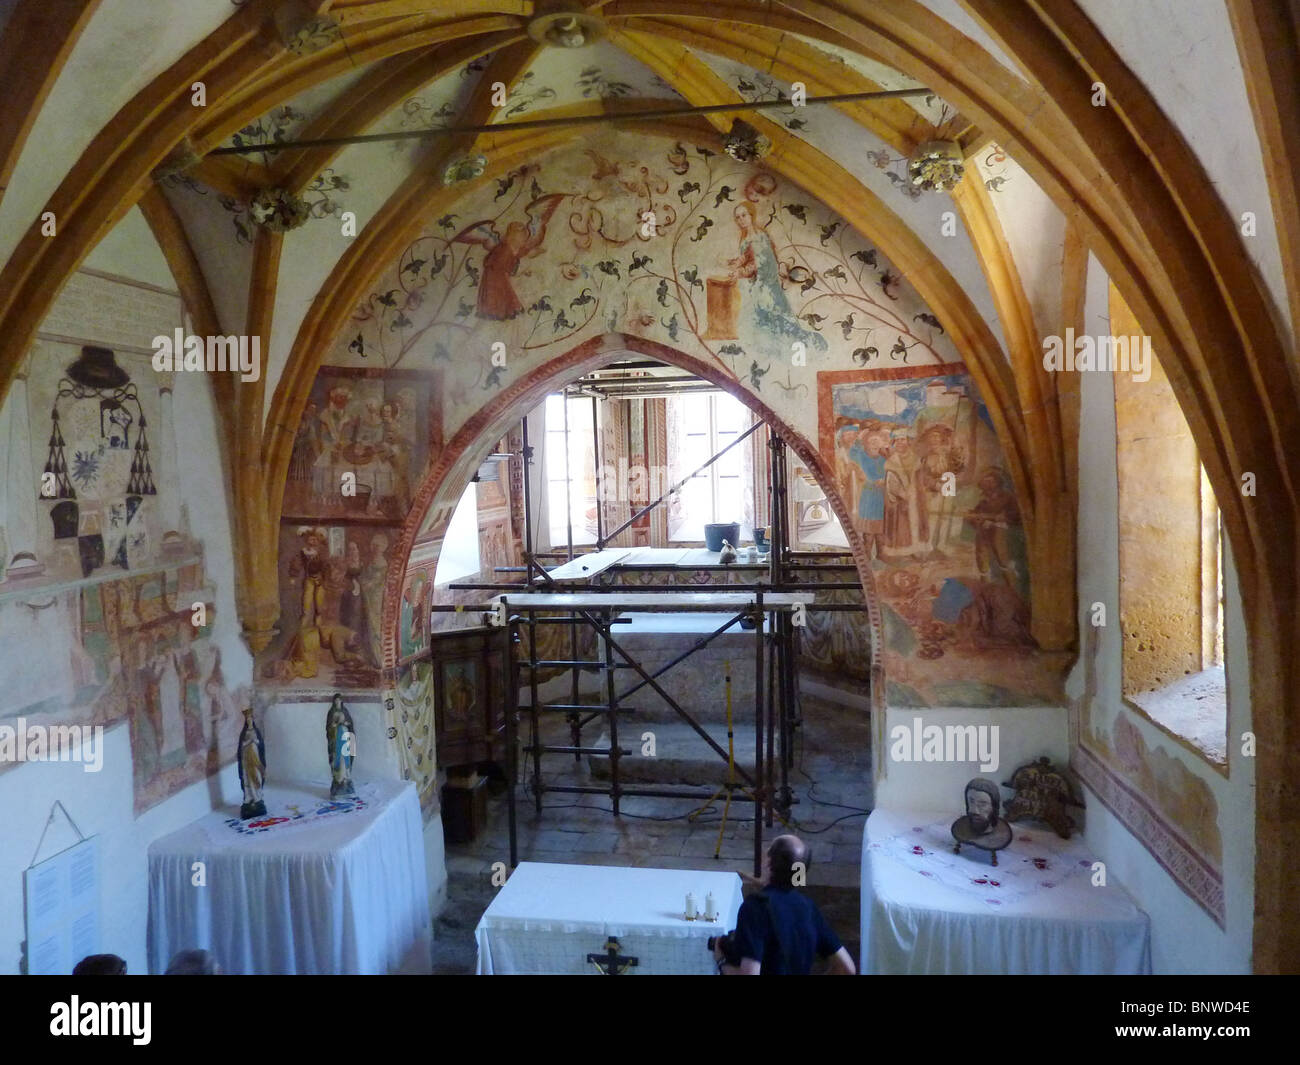 SLOVENIA - Bohinj. Medieval wall paintings being restored in the Church of St John the Baptist. Photo Tony Gale Stock Photo